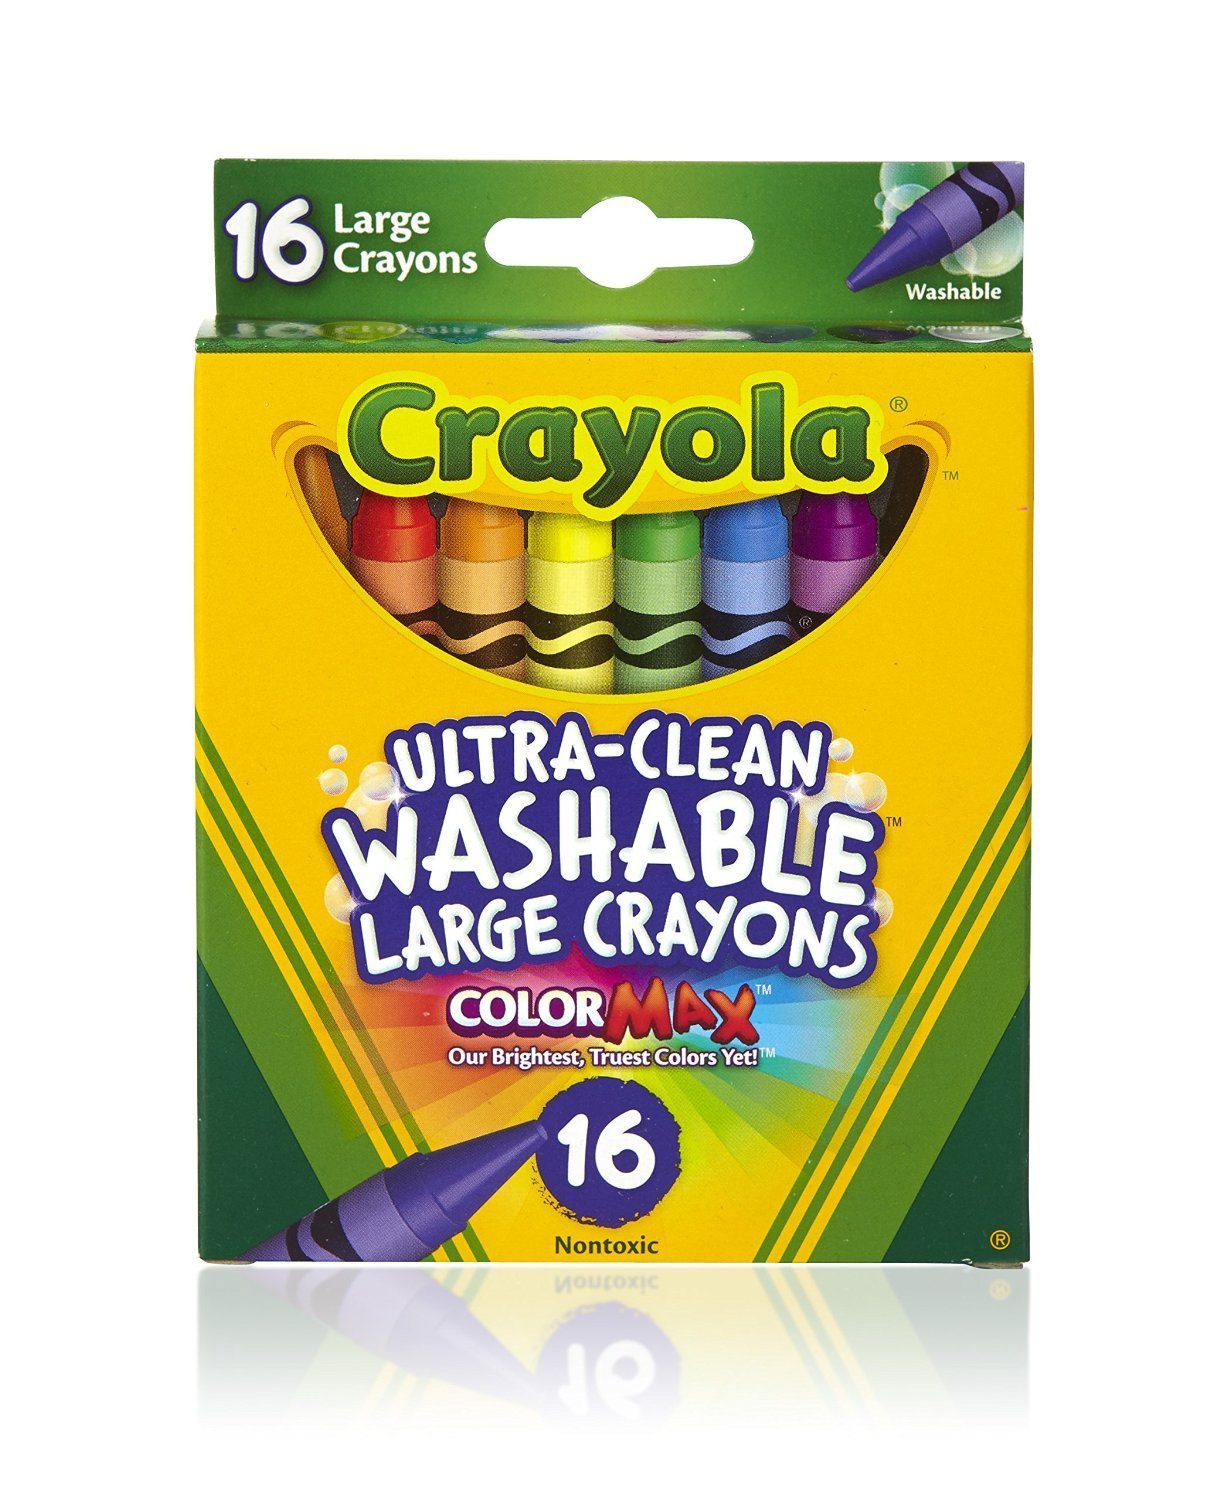 Crayola Crayon Set, 96-Colors, Stocking Stuffers for Kids, Holiday Gifts 